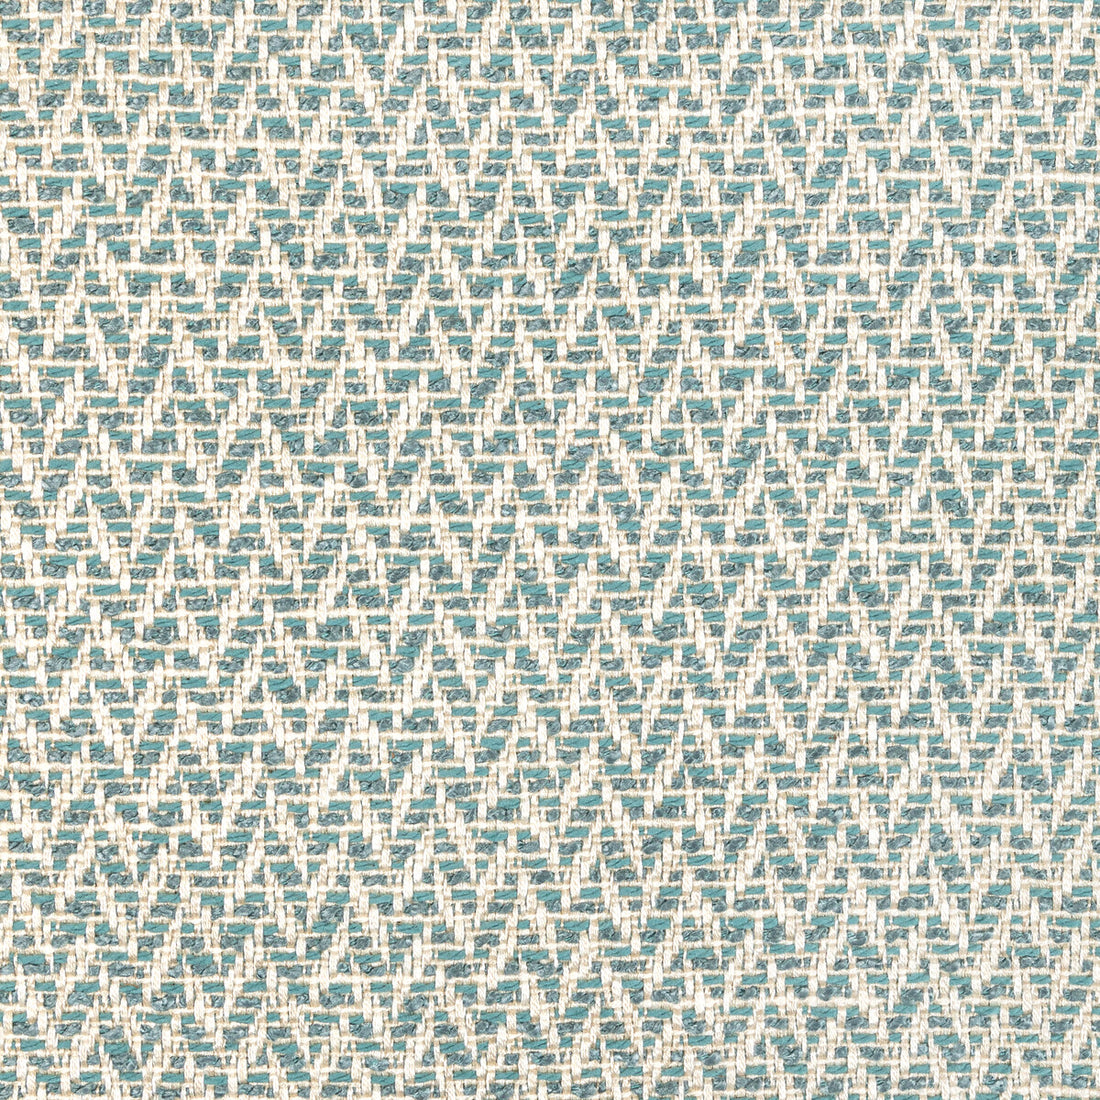 Kravet Design fabric in 36418-313 color - pattern 36418.313.0 - by Kravet Design in the Performance Crypton Home collection